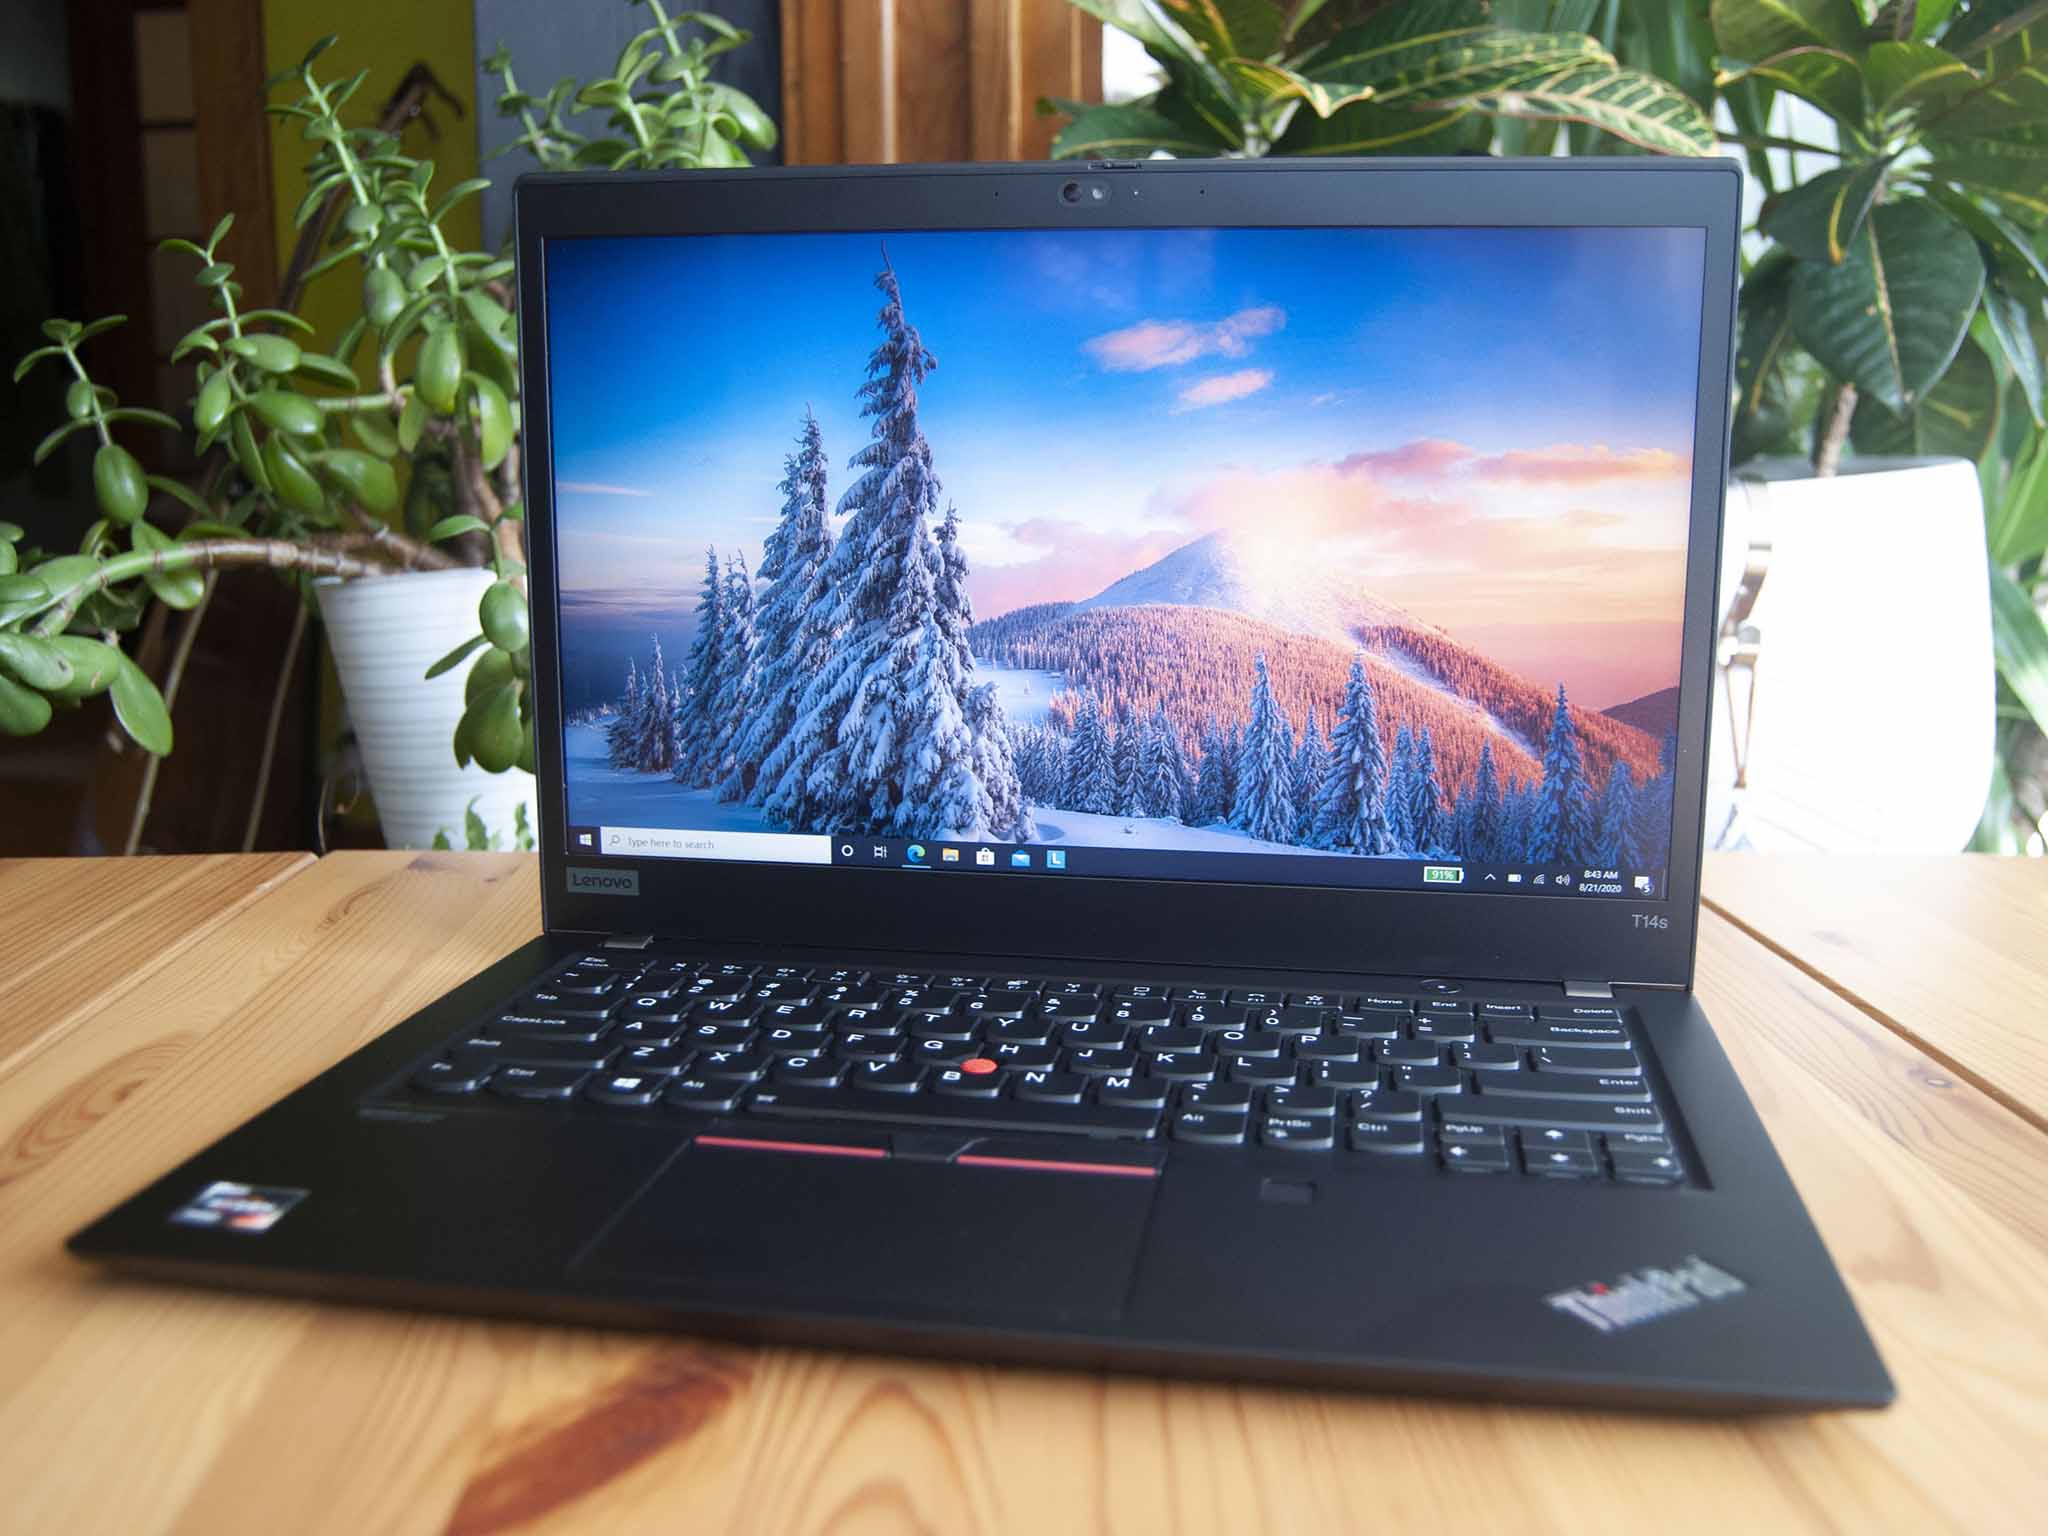 Lenovo ThinkPad T14s review: Comparing AMD and Intel versions of the